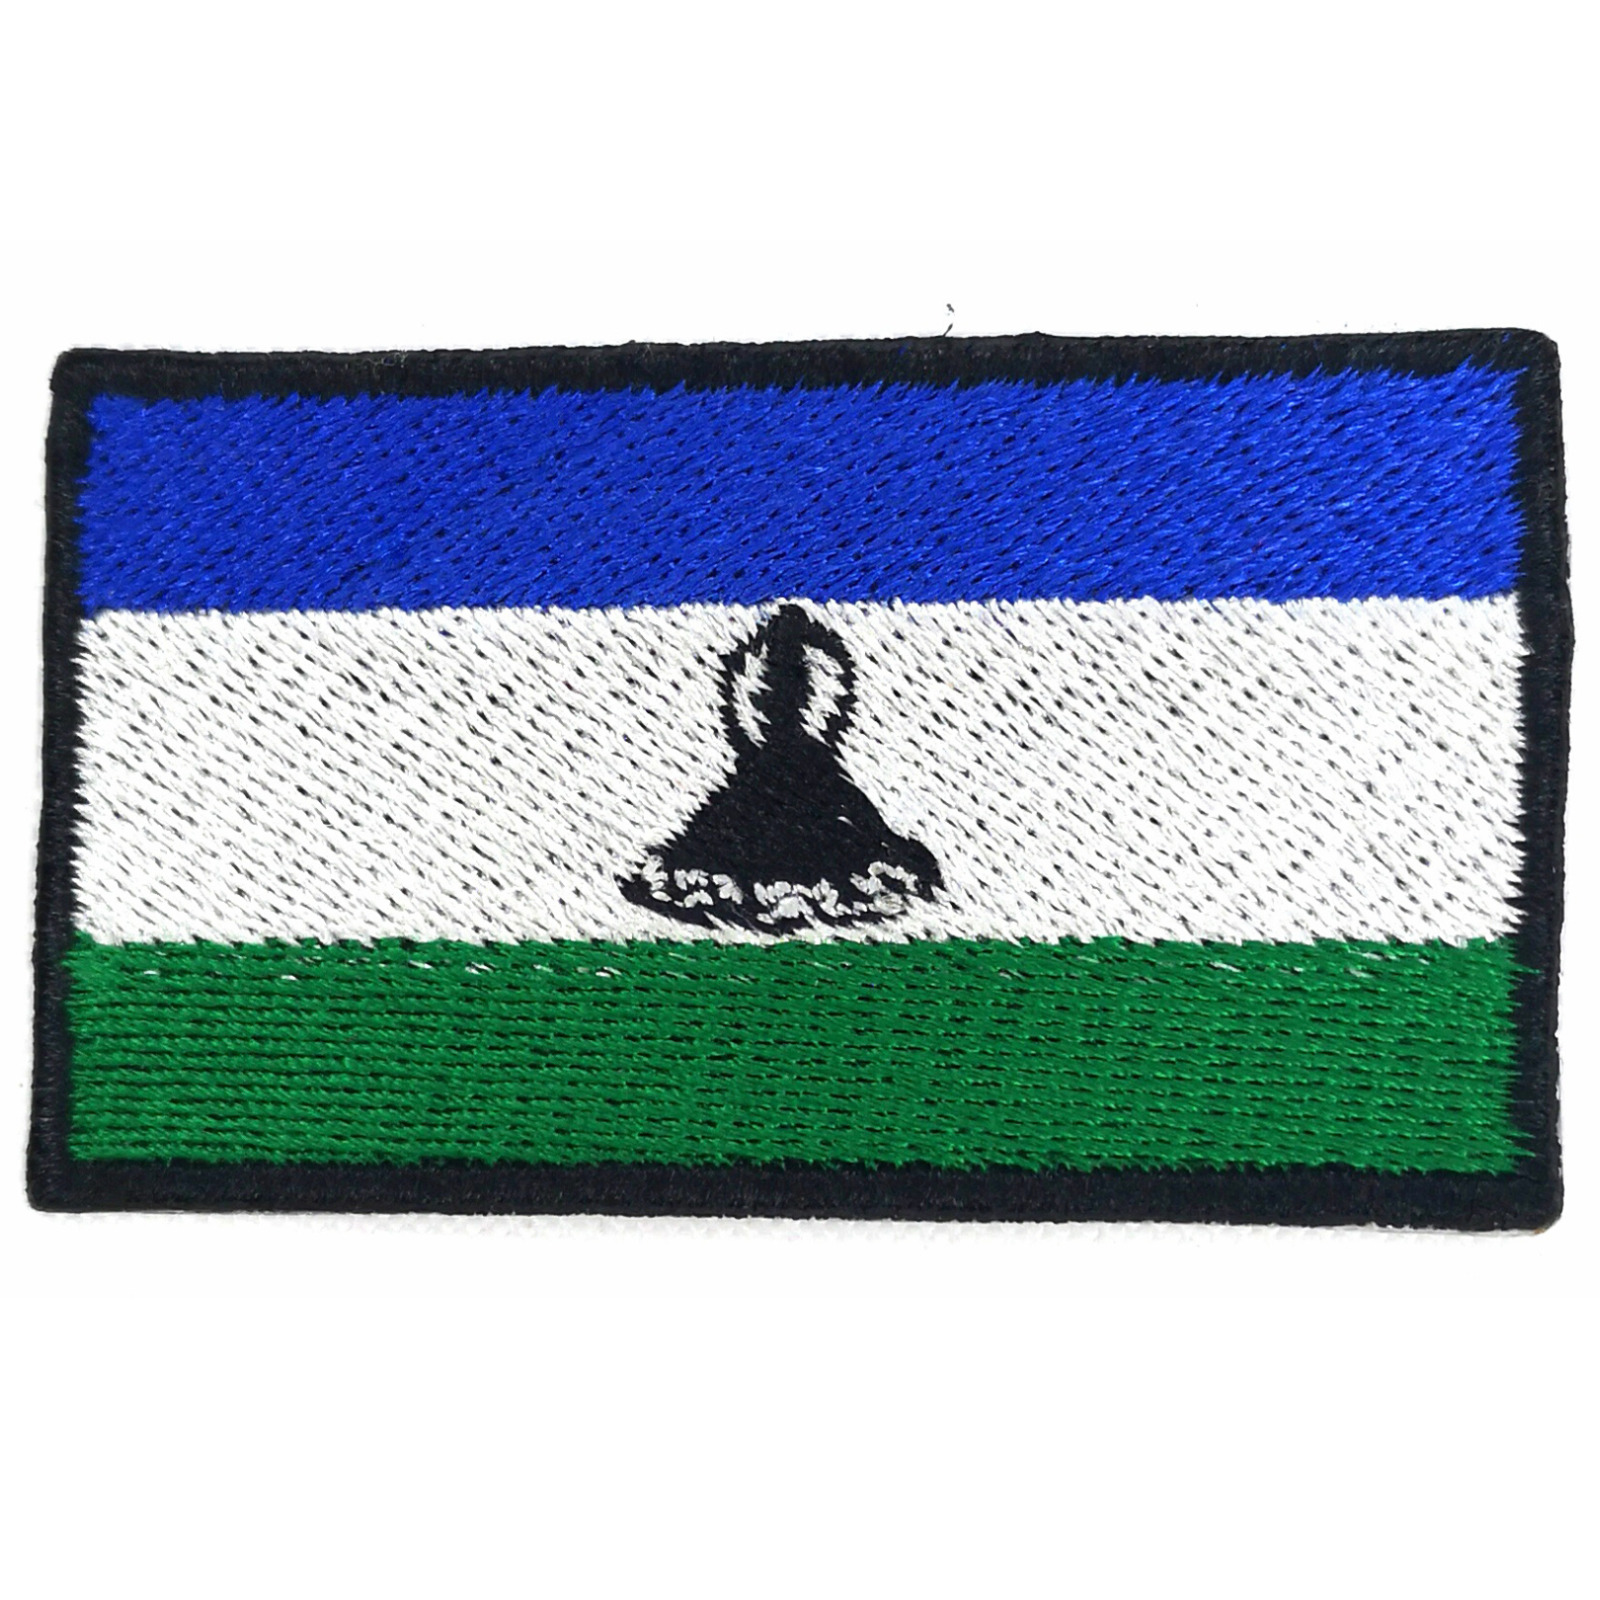 Lesotho National Country Flag Jean Jacket Cloth Iron Sew on Embroidered Patch